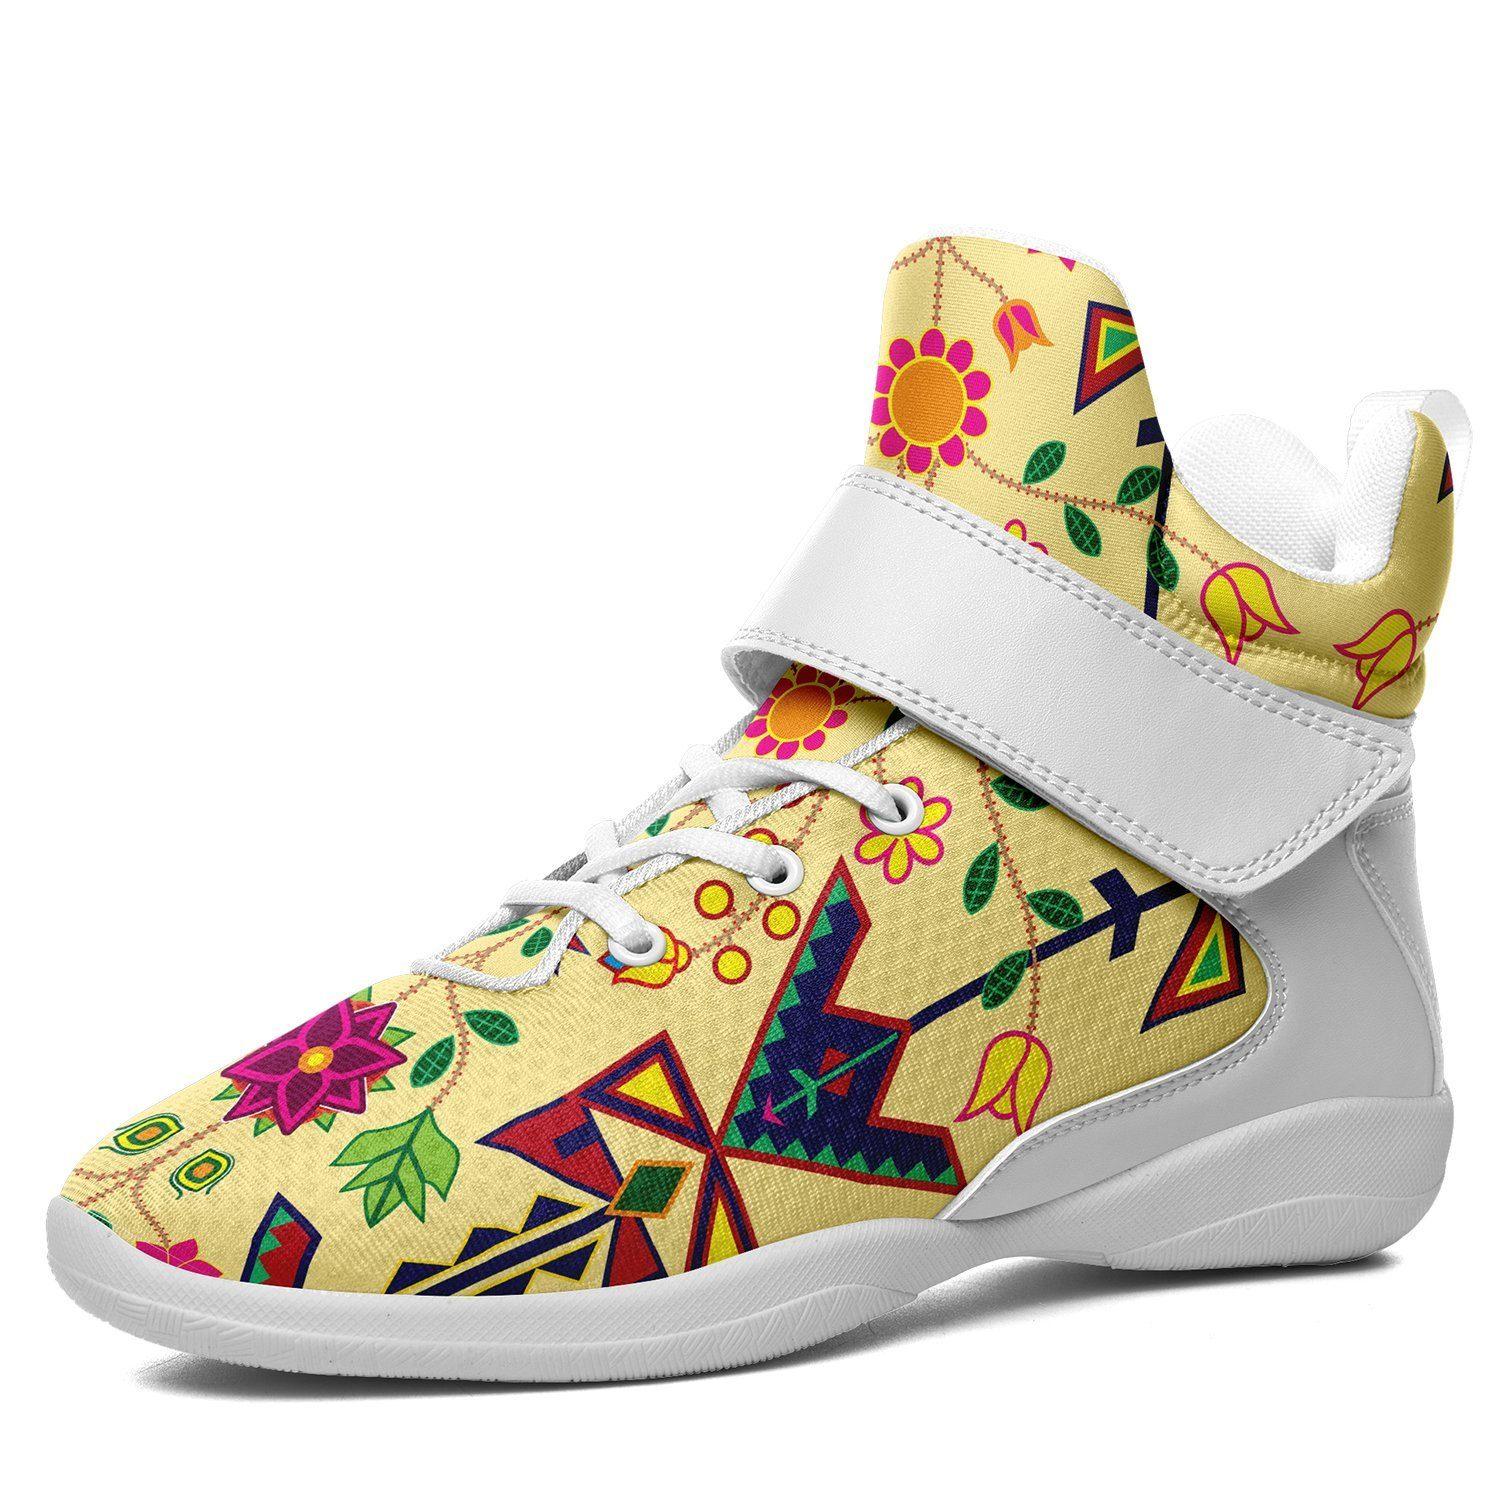 Geometric Floral Spring Vanilla Kid's Ipottaa Basketball / Sport High Top Shoes 49 Dzine US Women 4.5 / US Youth 3.5 / EUR 35 White Sole with White Strap 